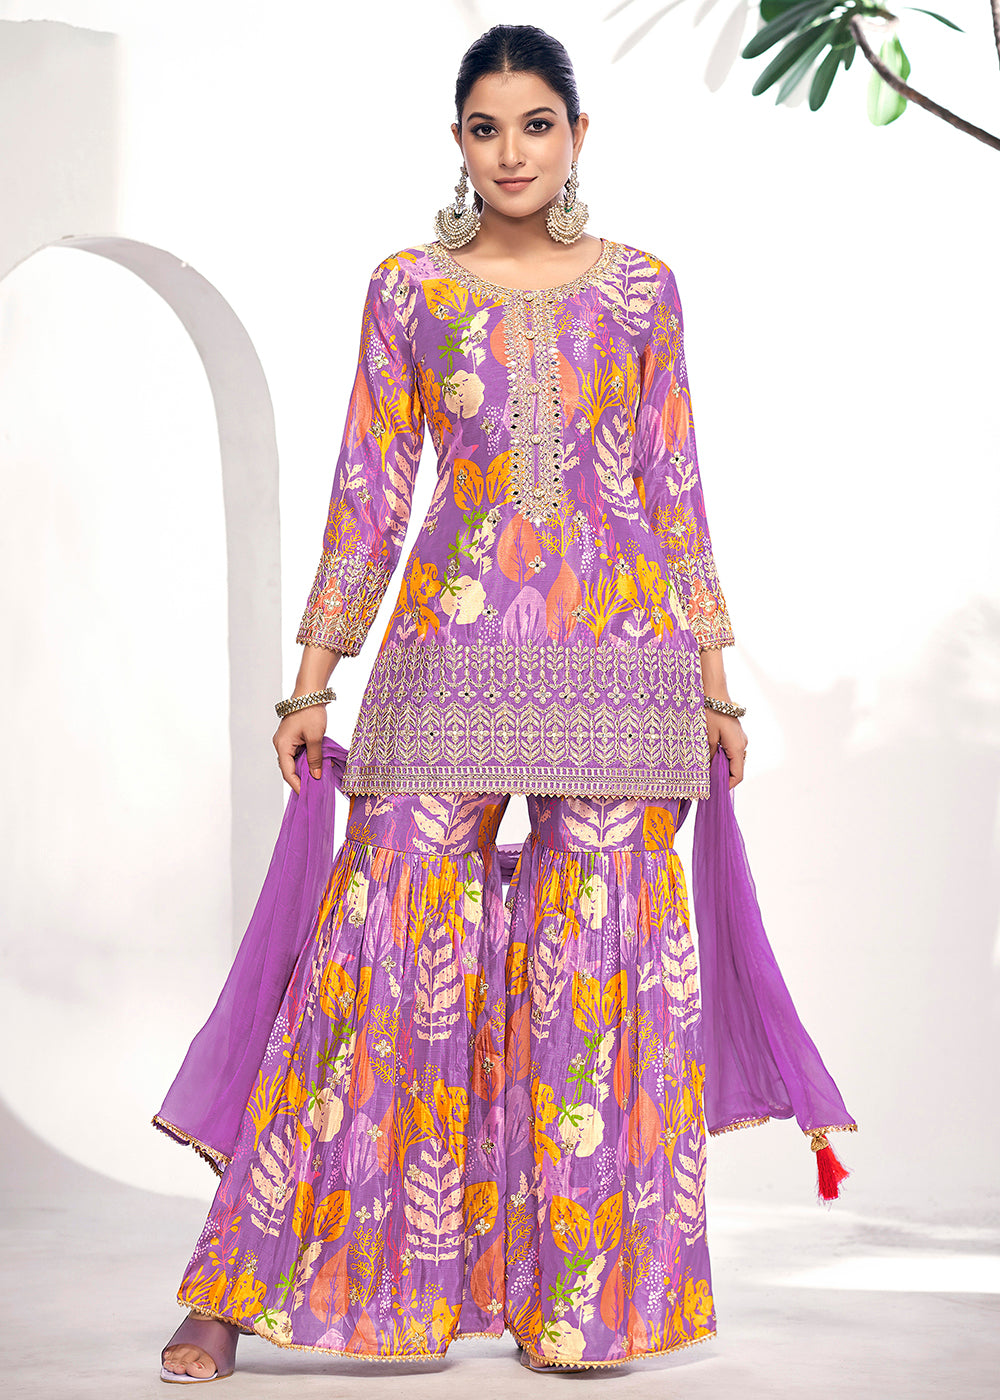 Shop Now Purple Embroidered & Printed Festive Gharara Suit Online at Empress Clothing in USA, UK, Canada, Italy & Worldwide. 